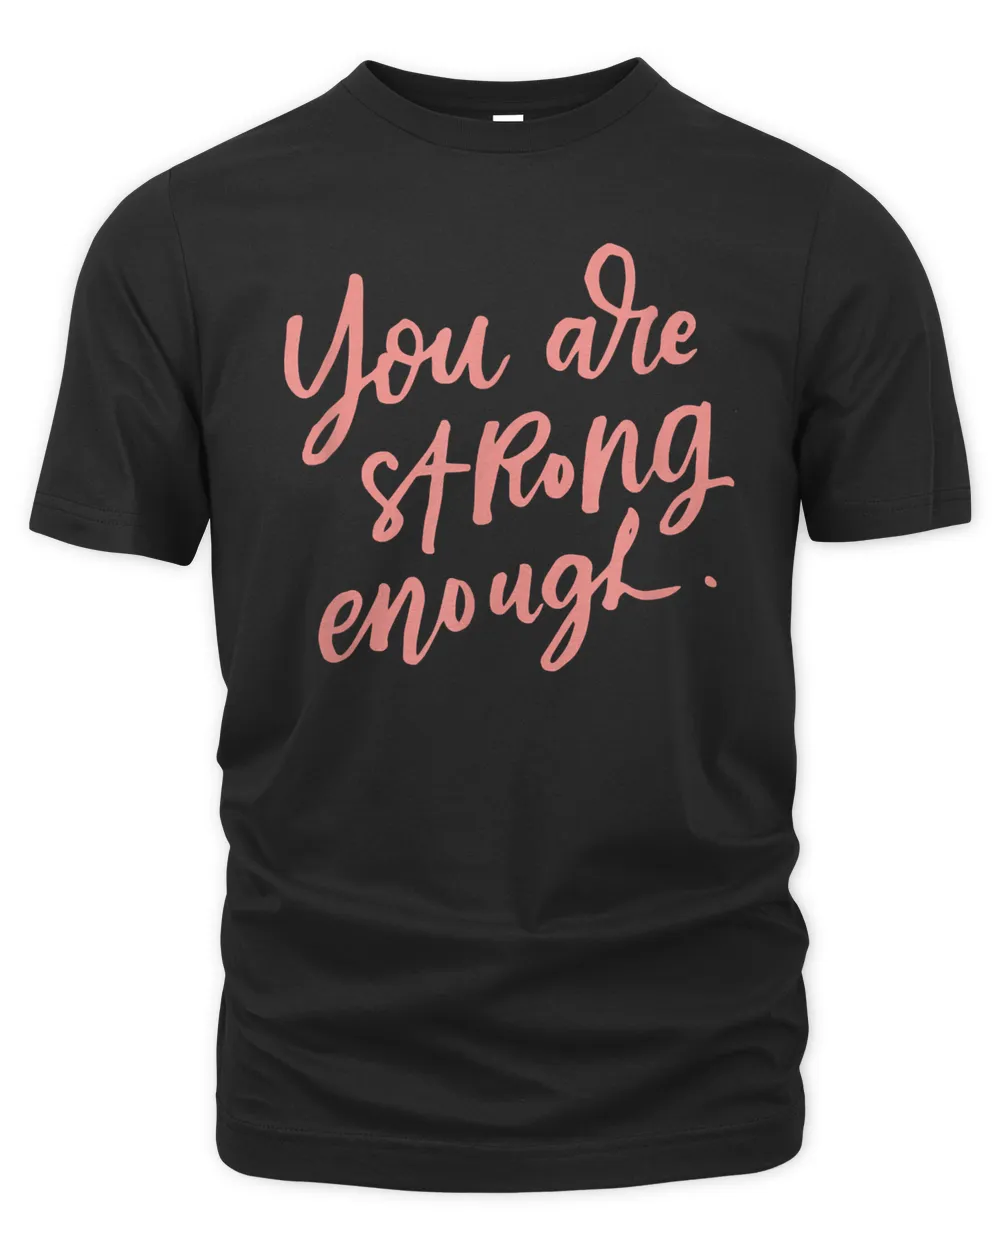 You are Strong Enough T-Shirt, Doula, Midwife, Birthing Gift